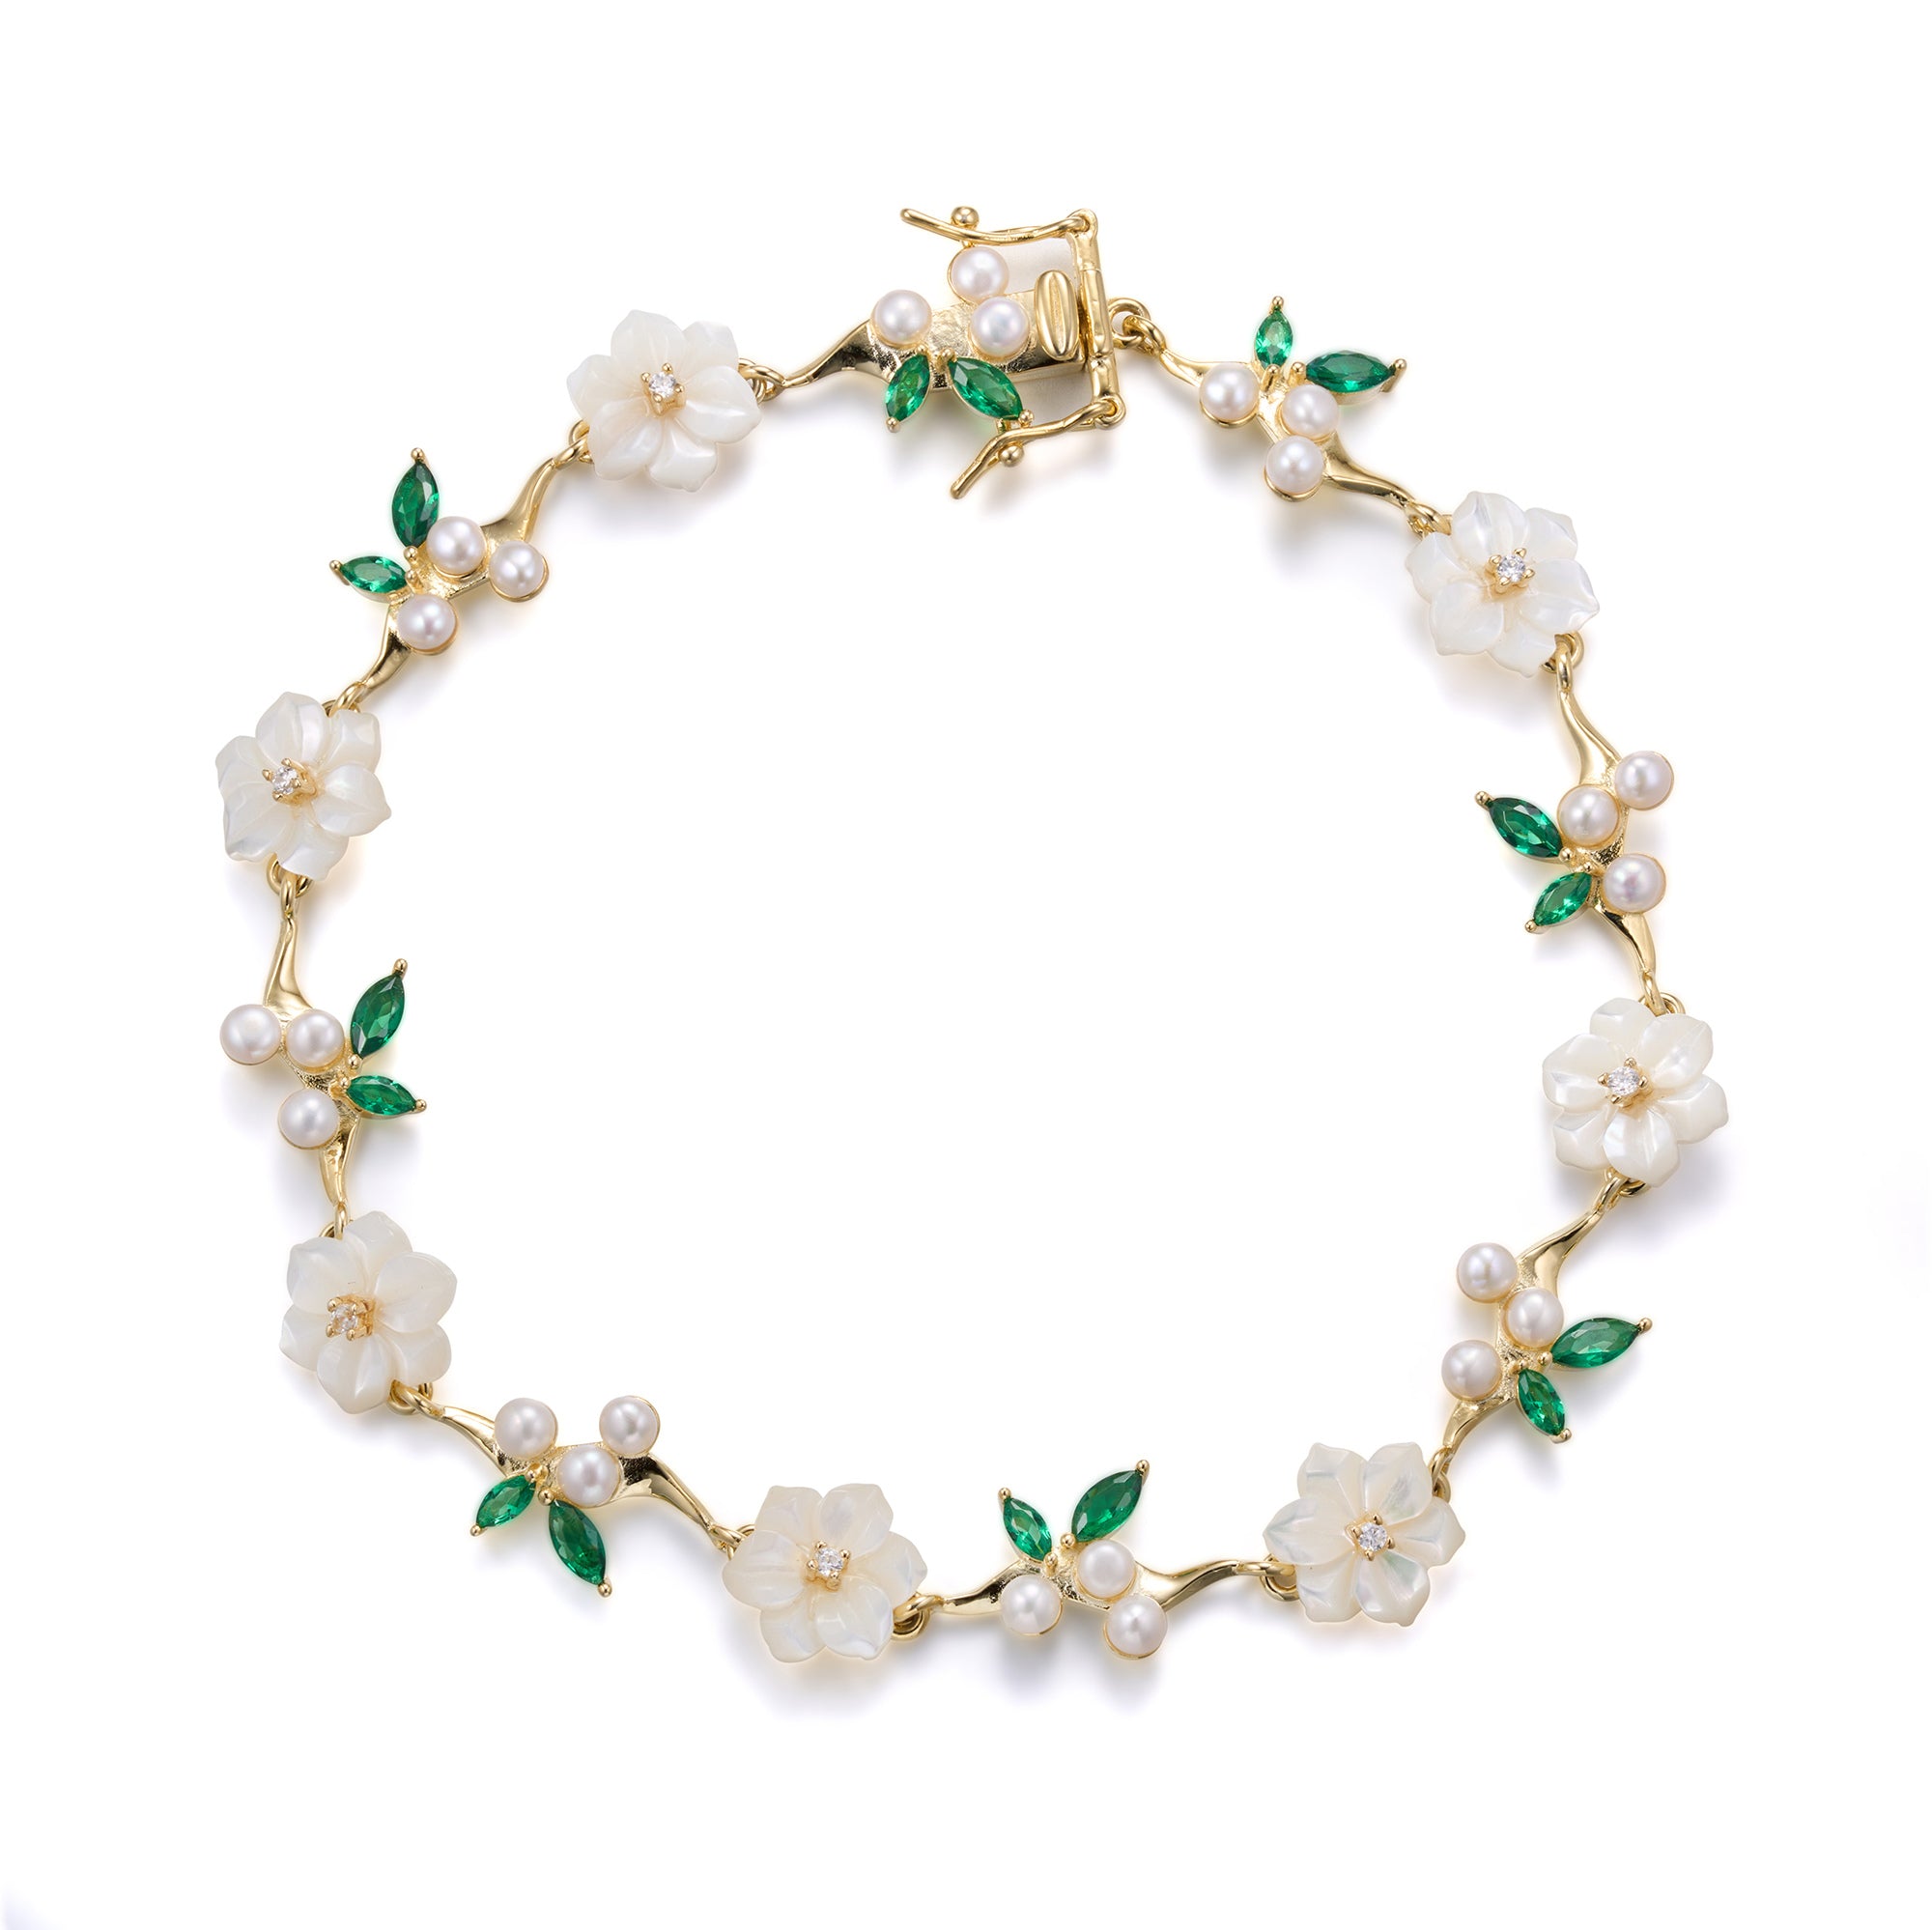 A silver gold plated bracelet with green stones, pearls and shell flowers.